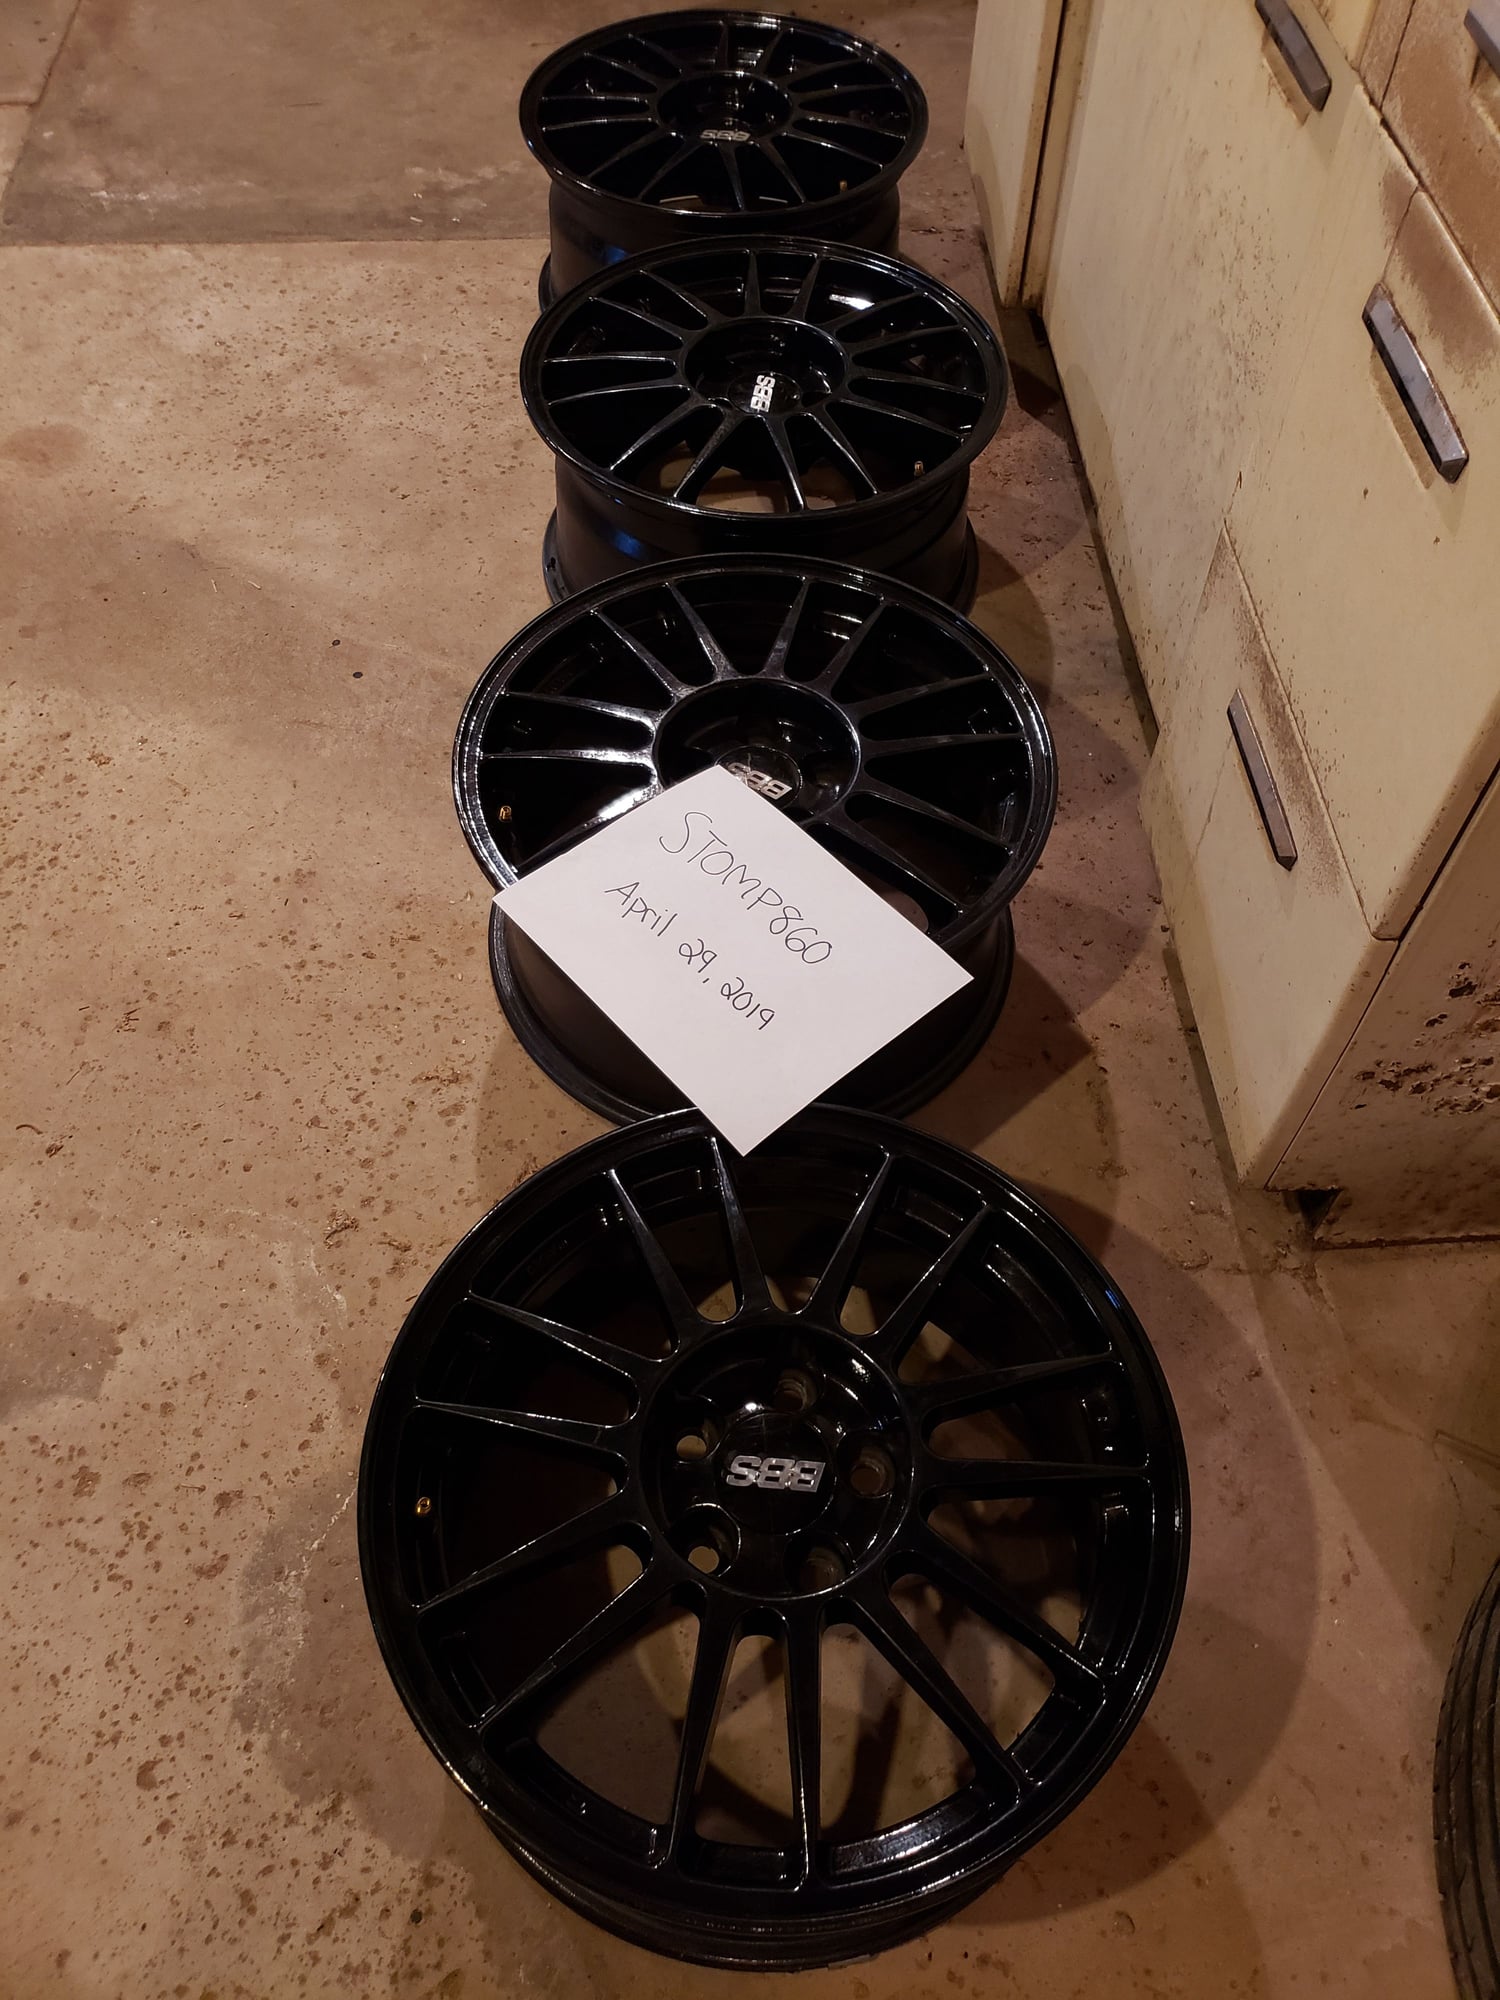 Wheels and Tires/Axles - Evo 9 BBS Wheels - Used - Vernon Rockville, CT 06066, United States